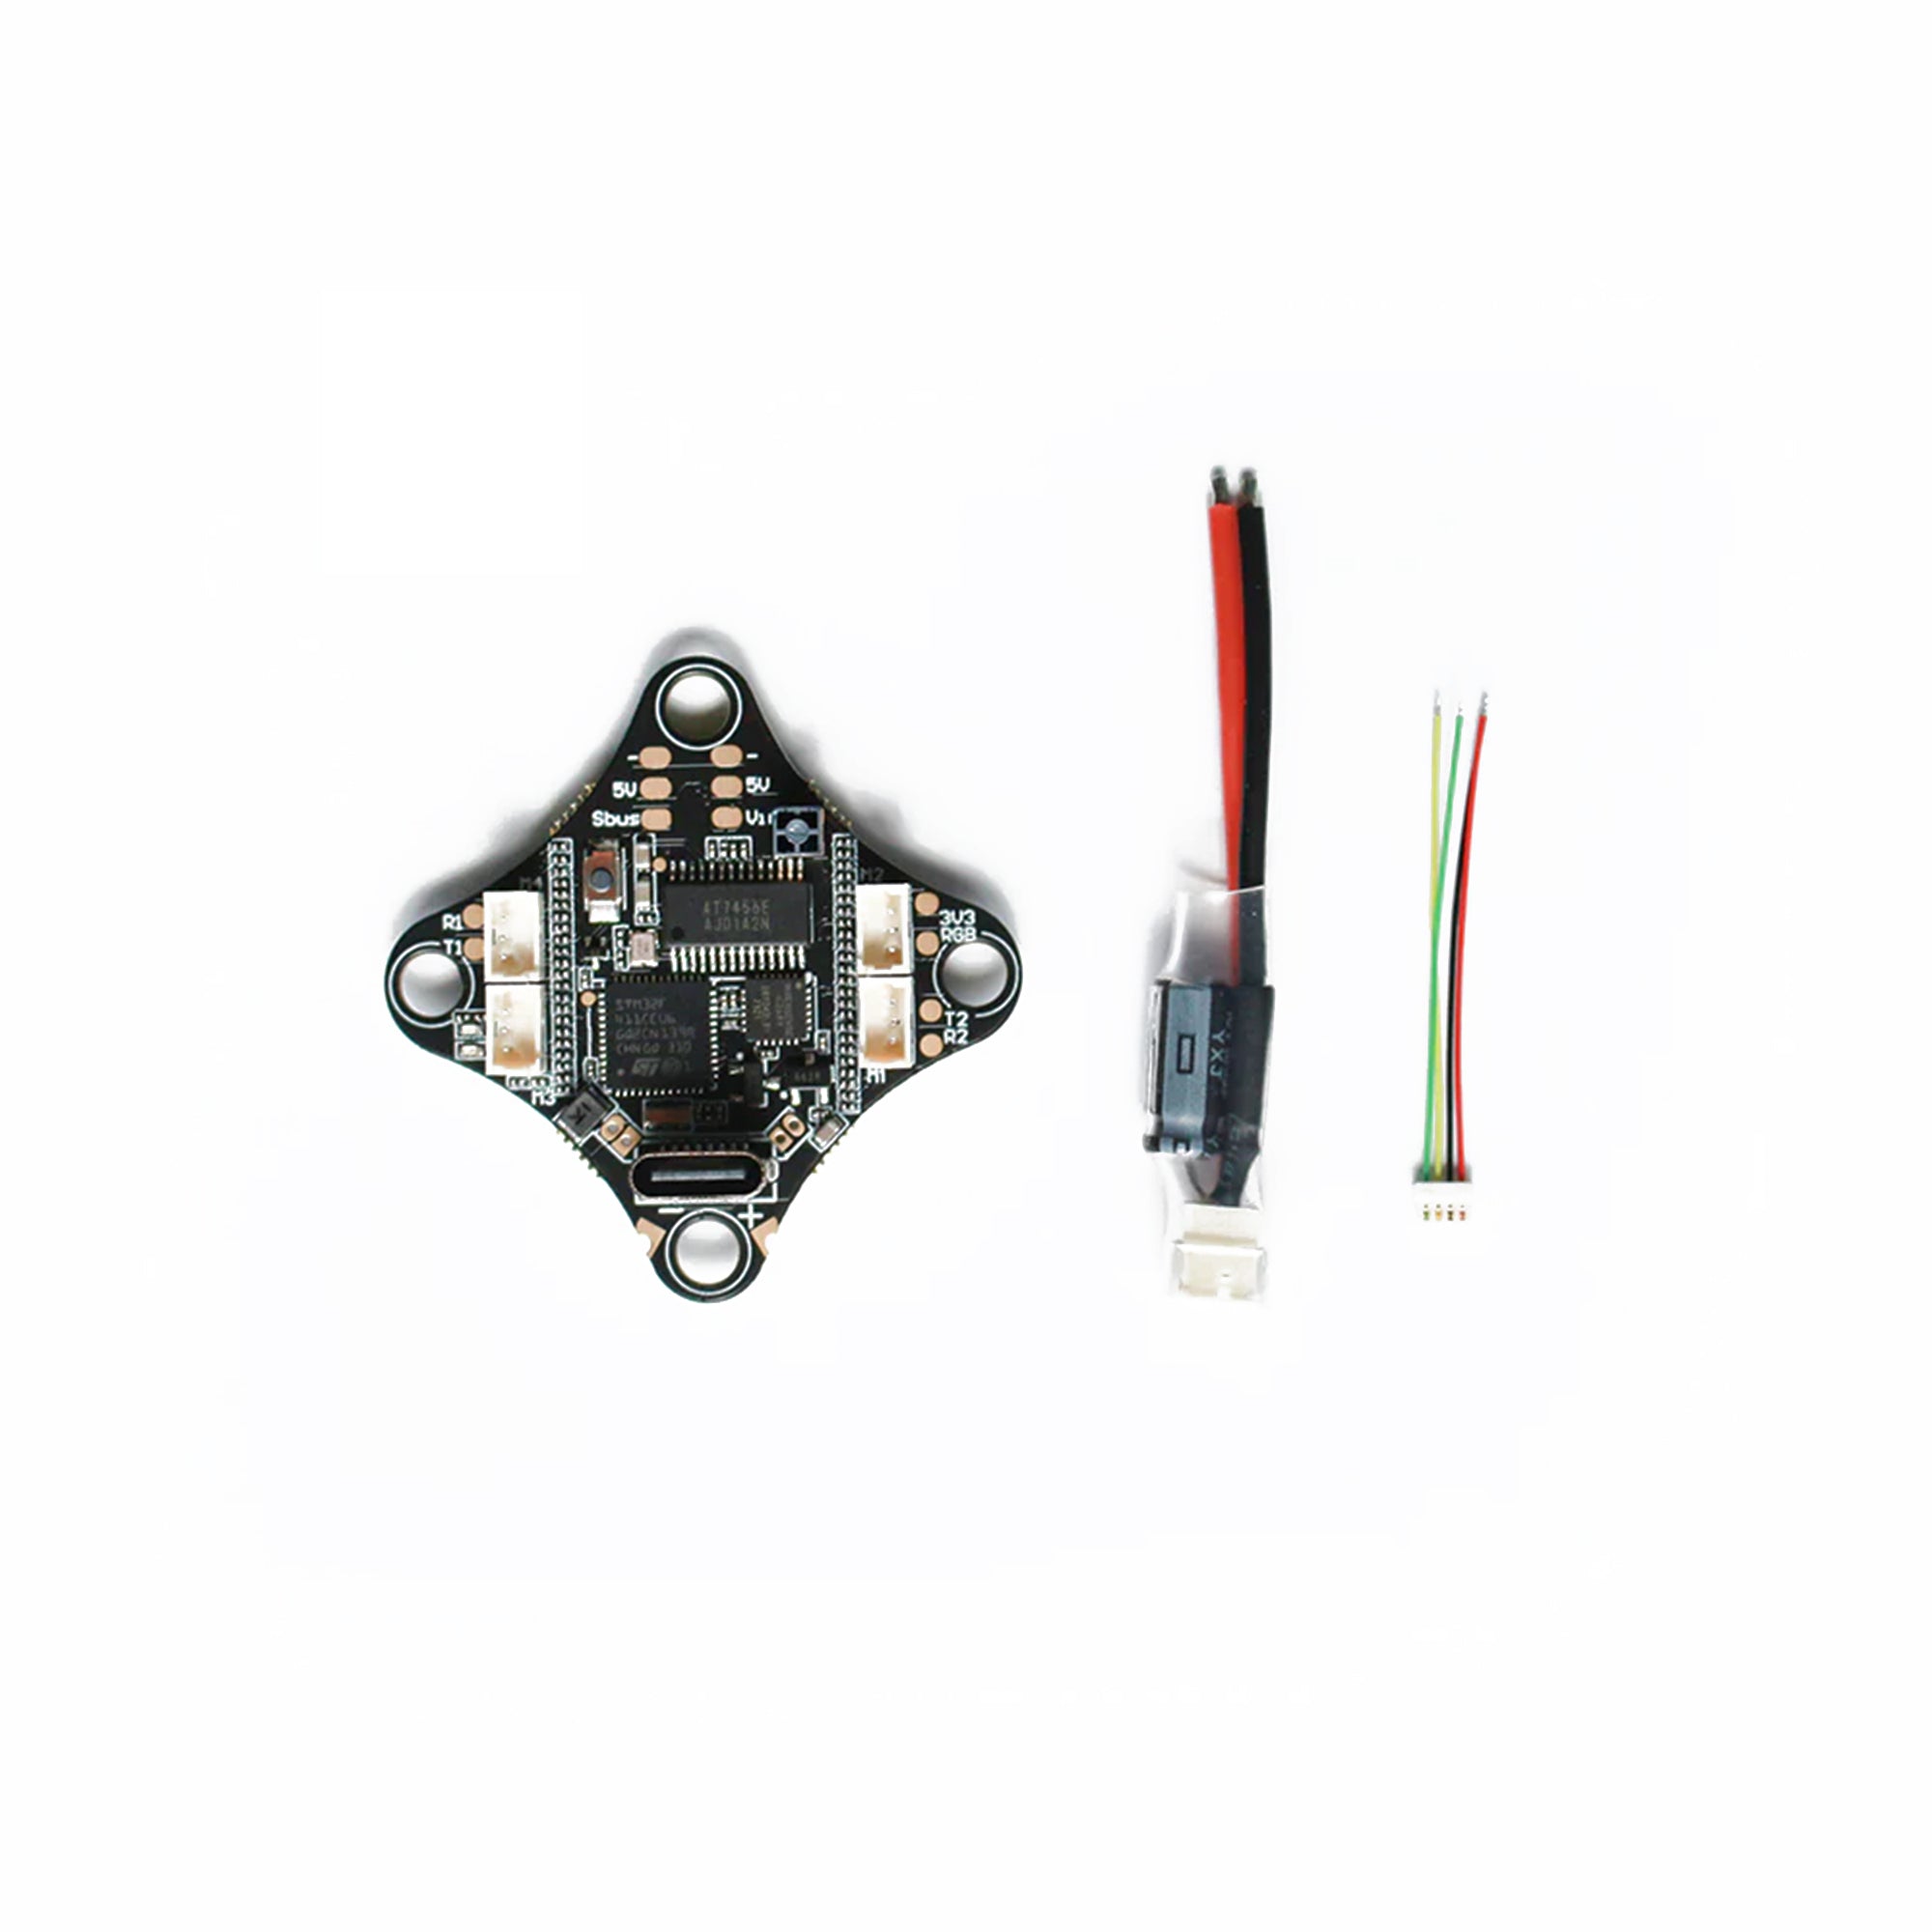 Tinyhawk III PLUS Spare Parts Pack C - All-In-One AIO FC ESC ELRS